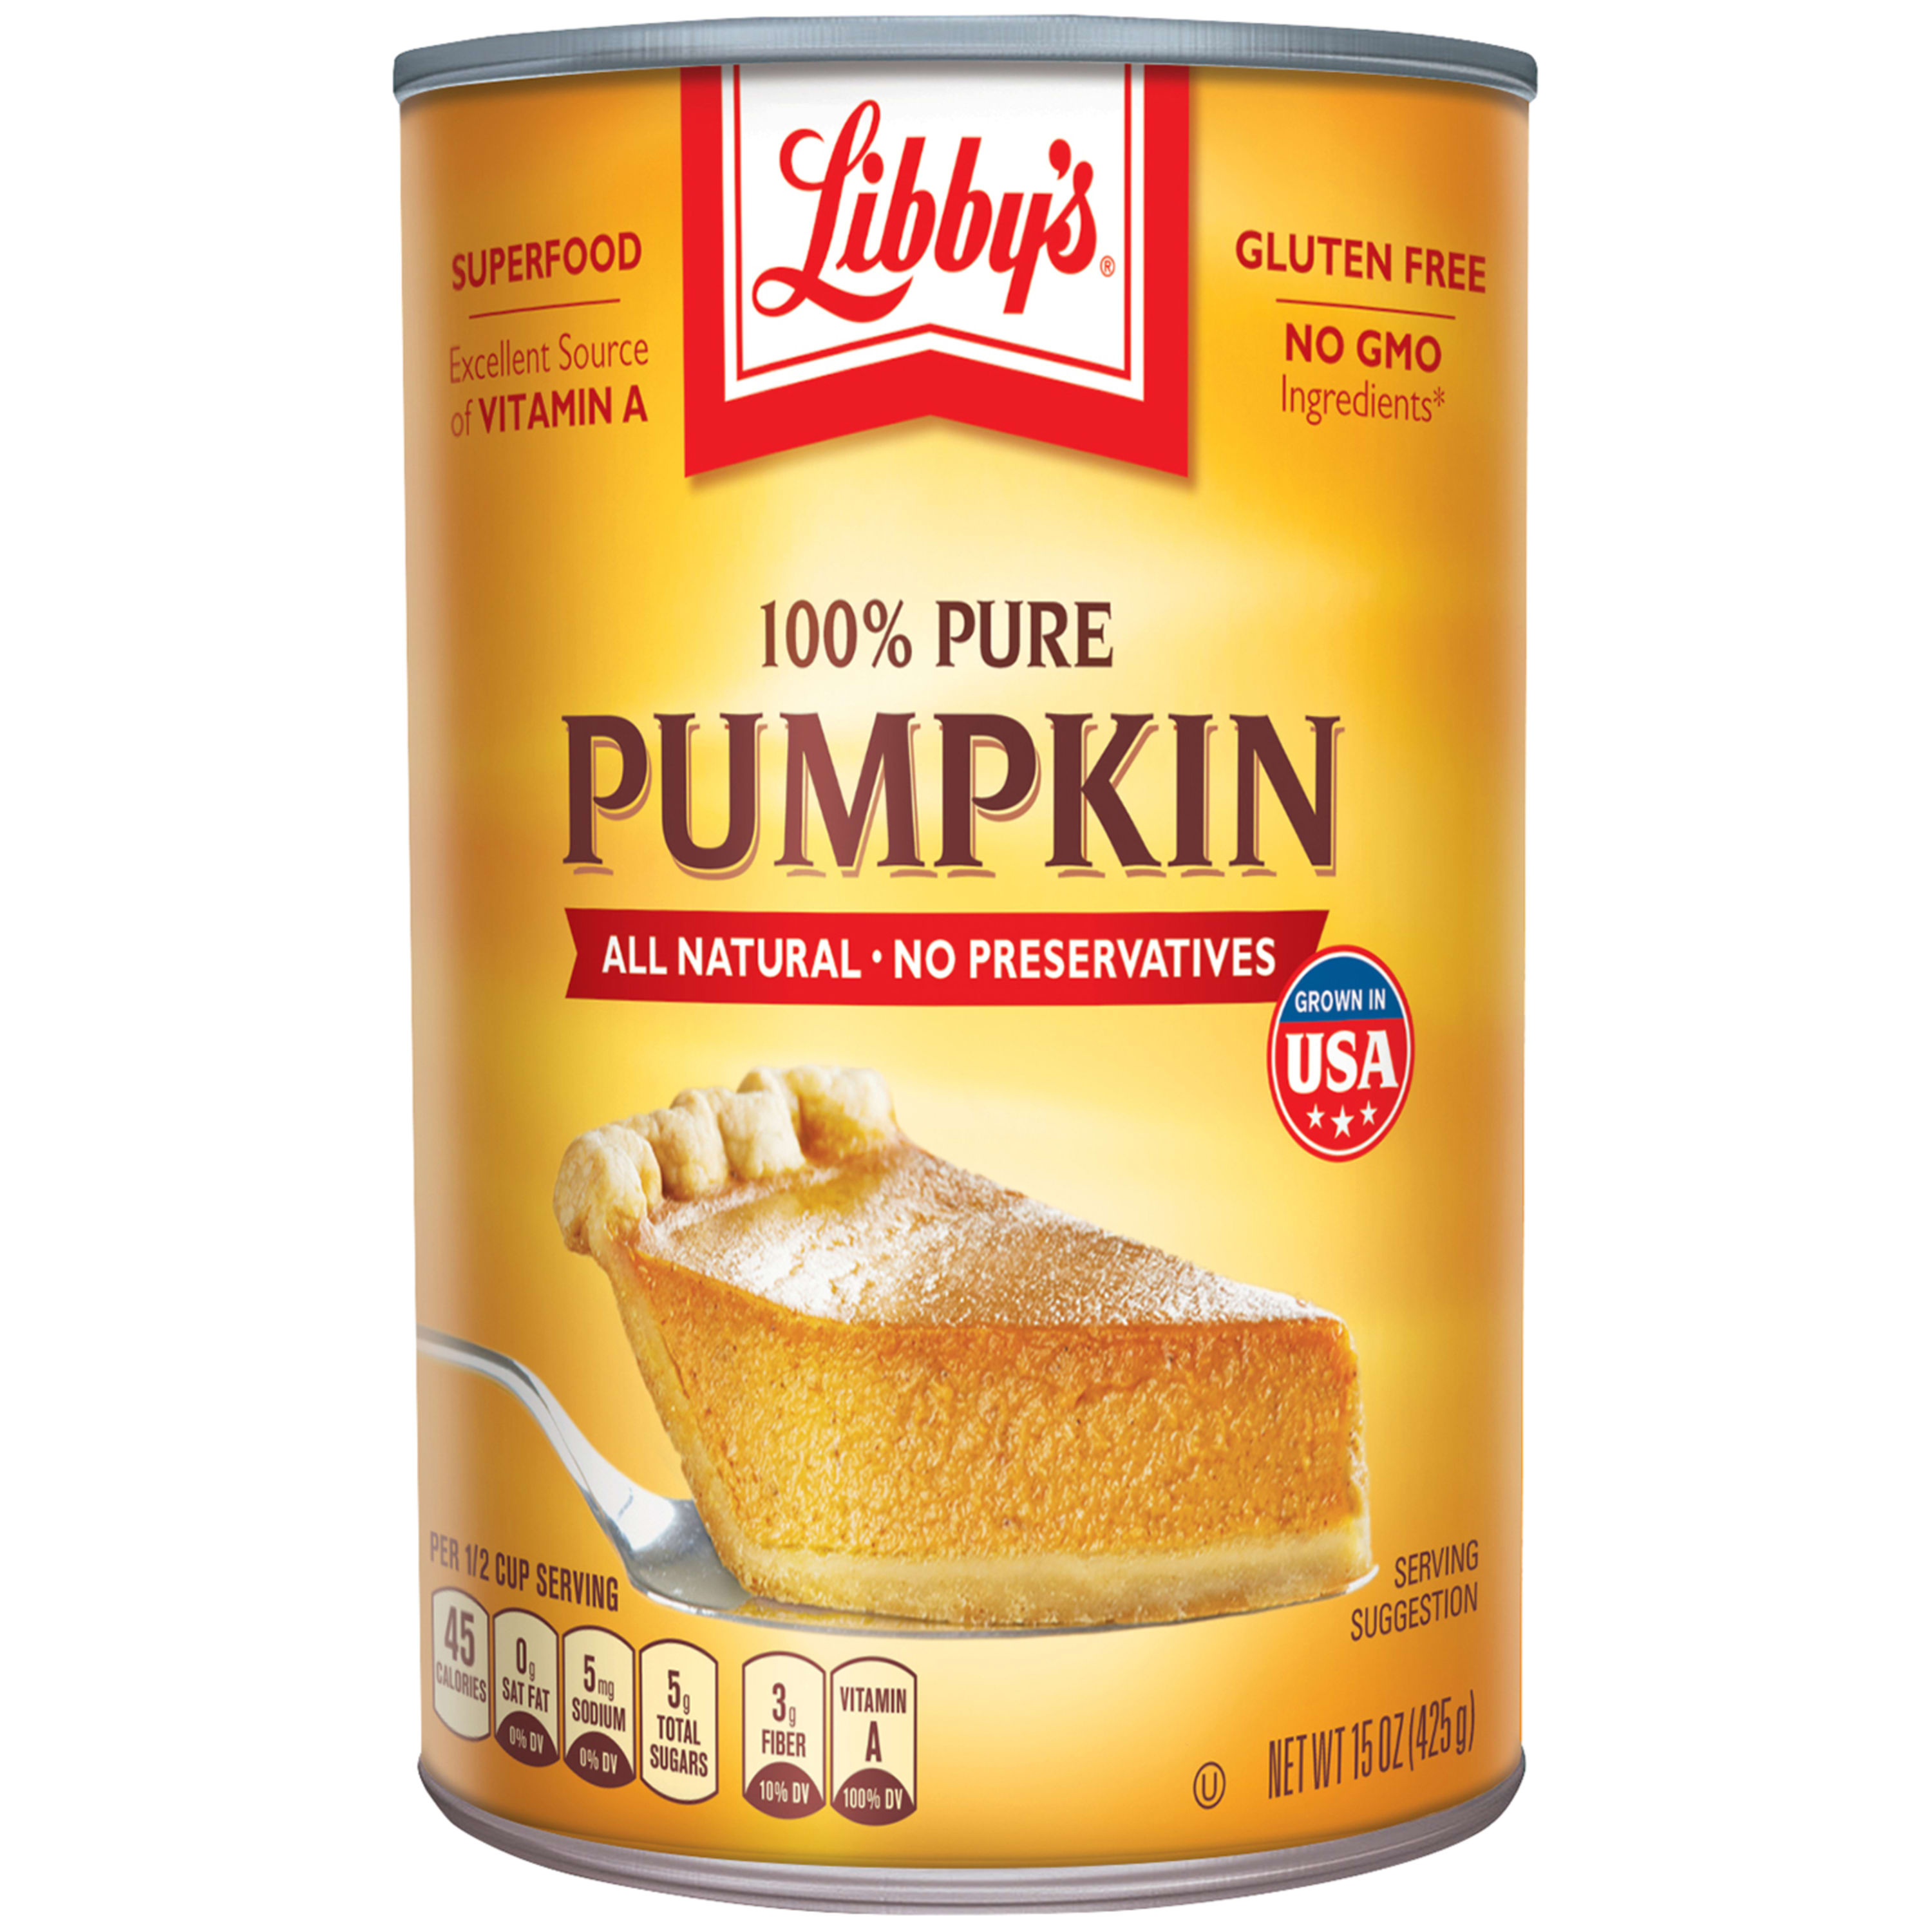 Libby's 100% Pure Canned Pumpkin all natural no preservatives, 15 oz - image 1 of 7